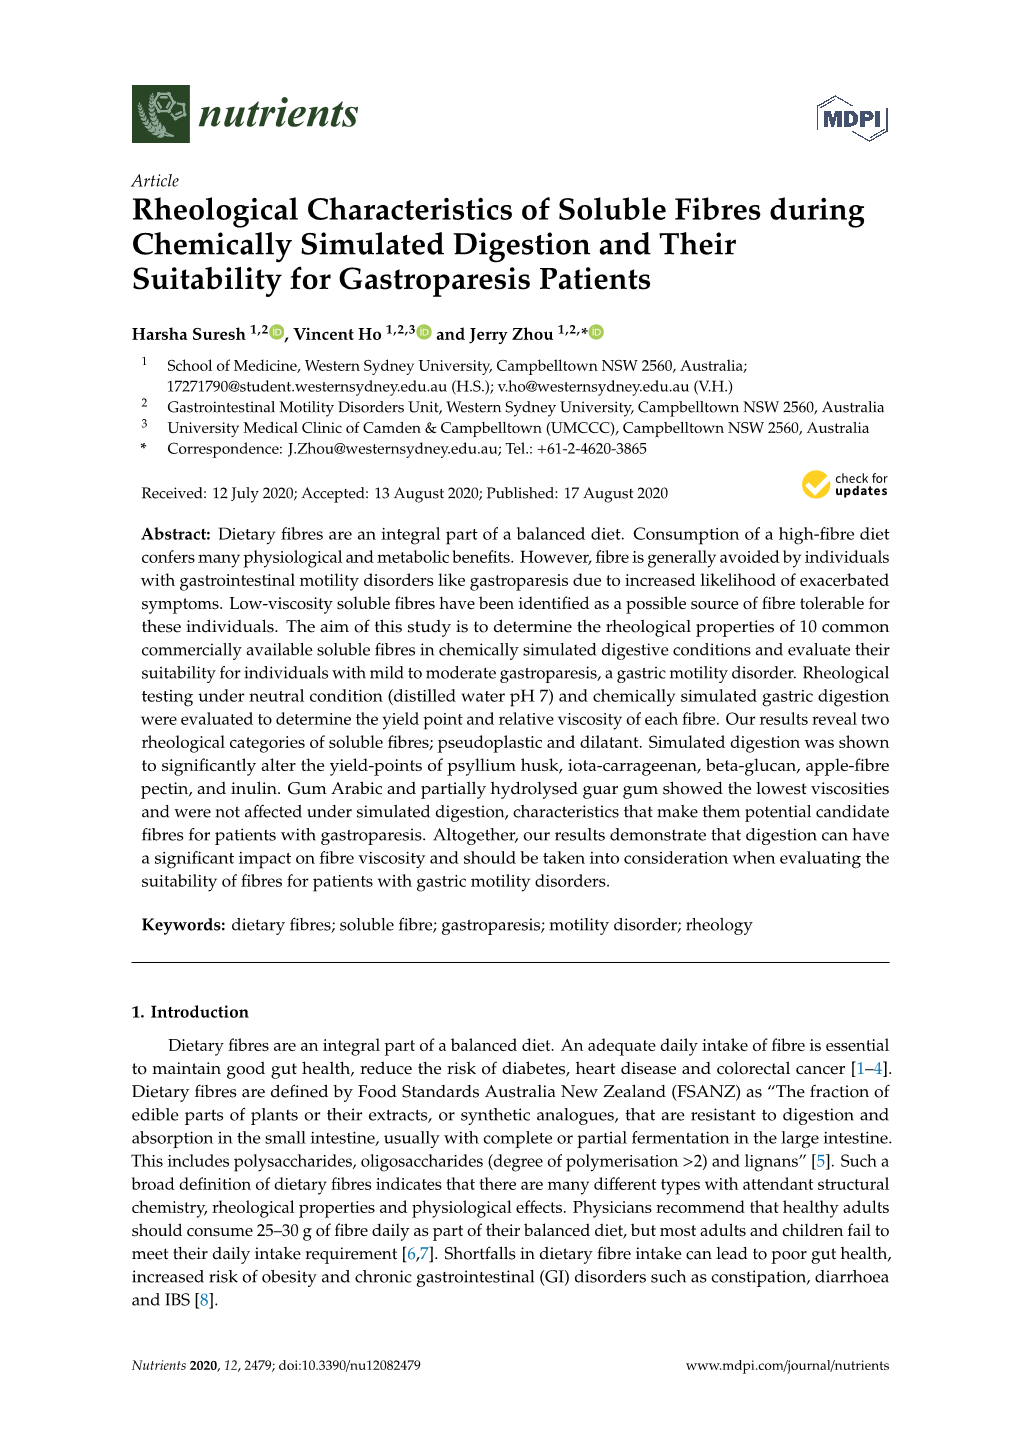 Rheological Characteristics of Soluble Fibres During Chemically Simulated Digestion and Their Suitability for Gastroparesis Patients